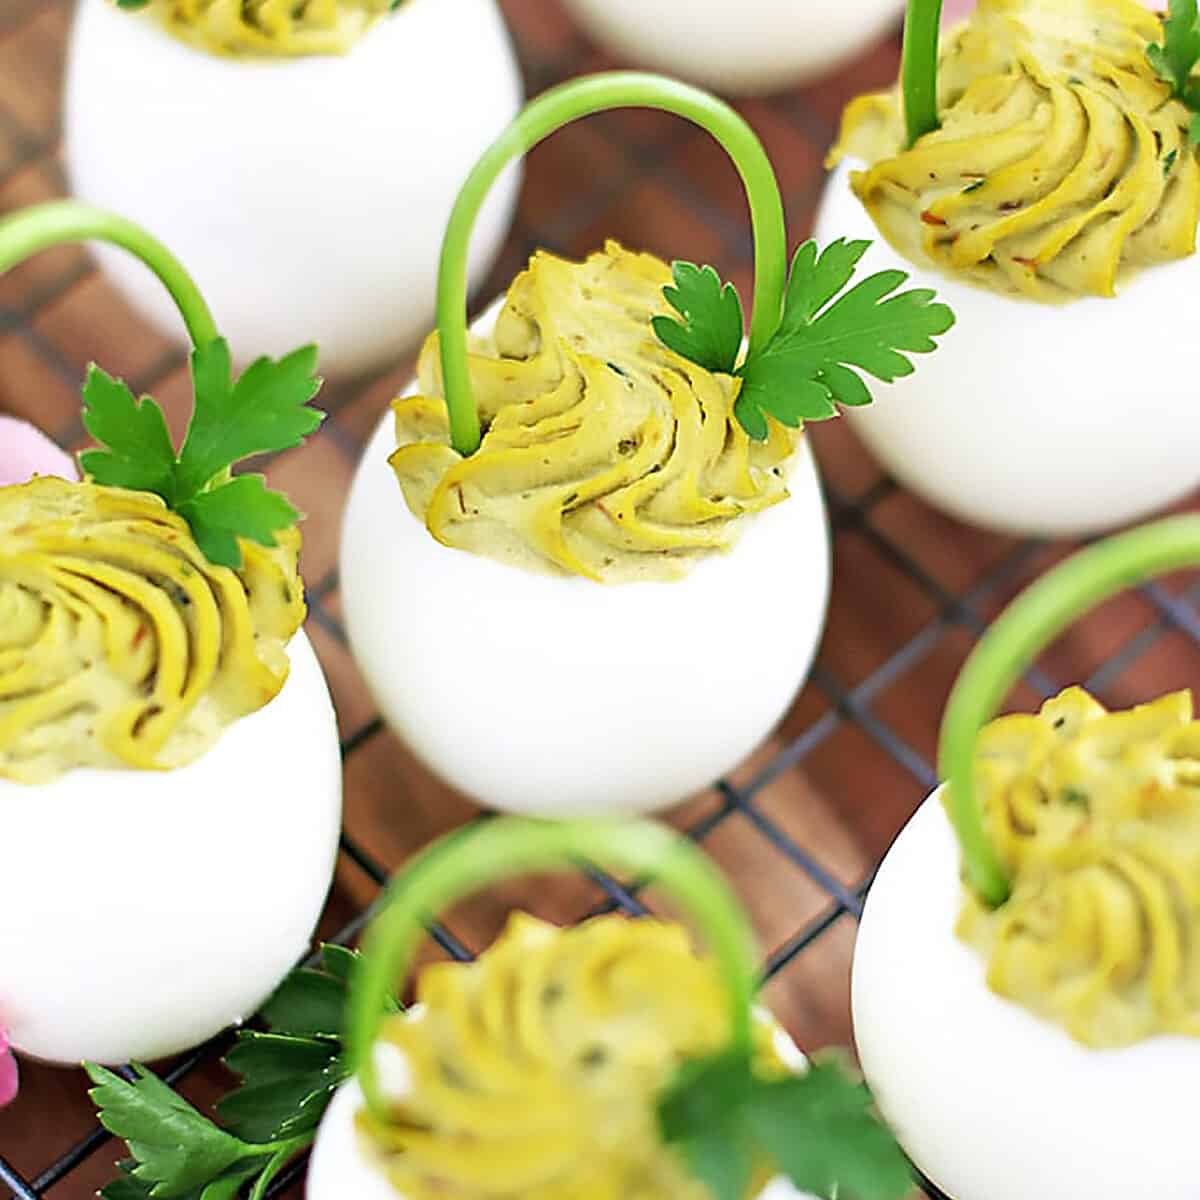 Who doesn’t love Easter eggs? And these Deviled Easter Egg Baskets are here to steal the show with their incredible flavor and absolutely adorable look!